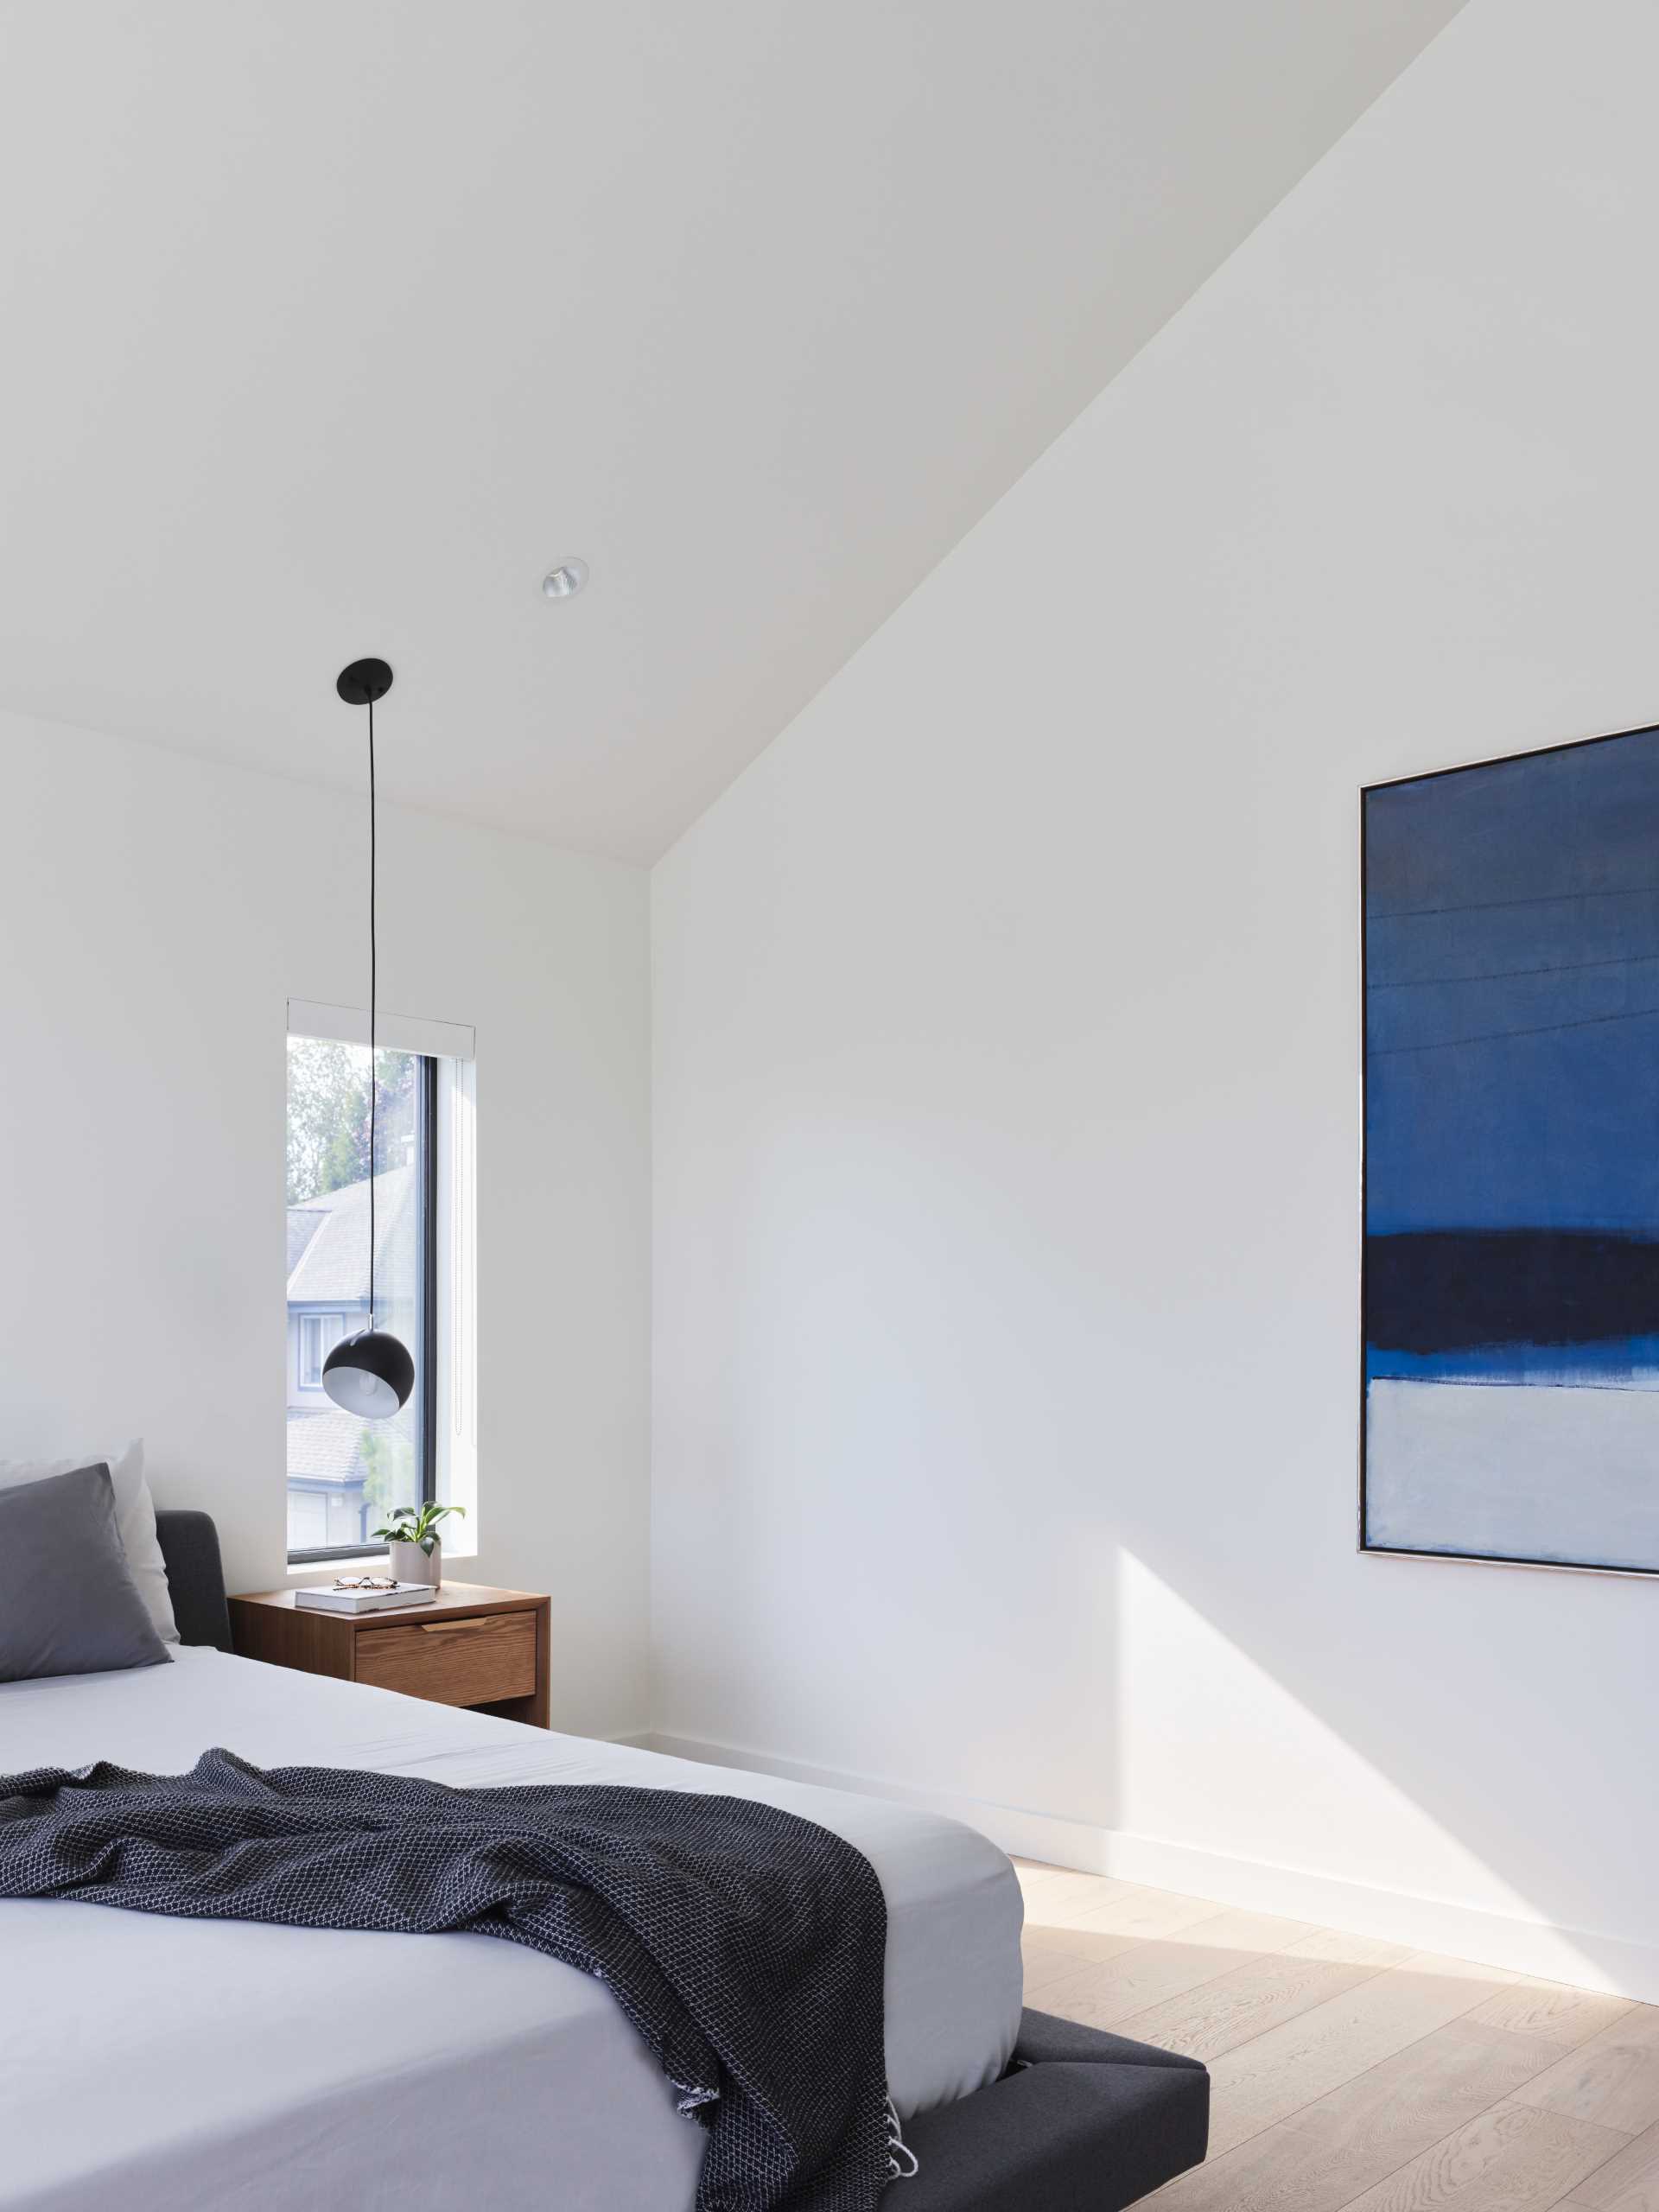 In this modern bedroom, blue artwork adds a pop of color, while a pendant light acts as a bedside lamp.